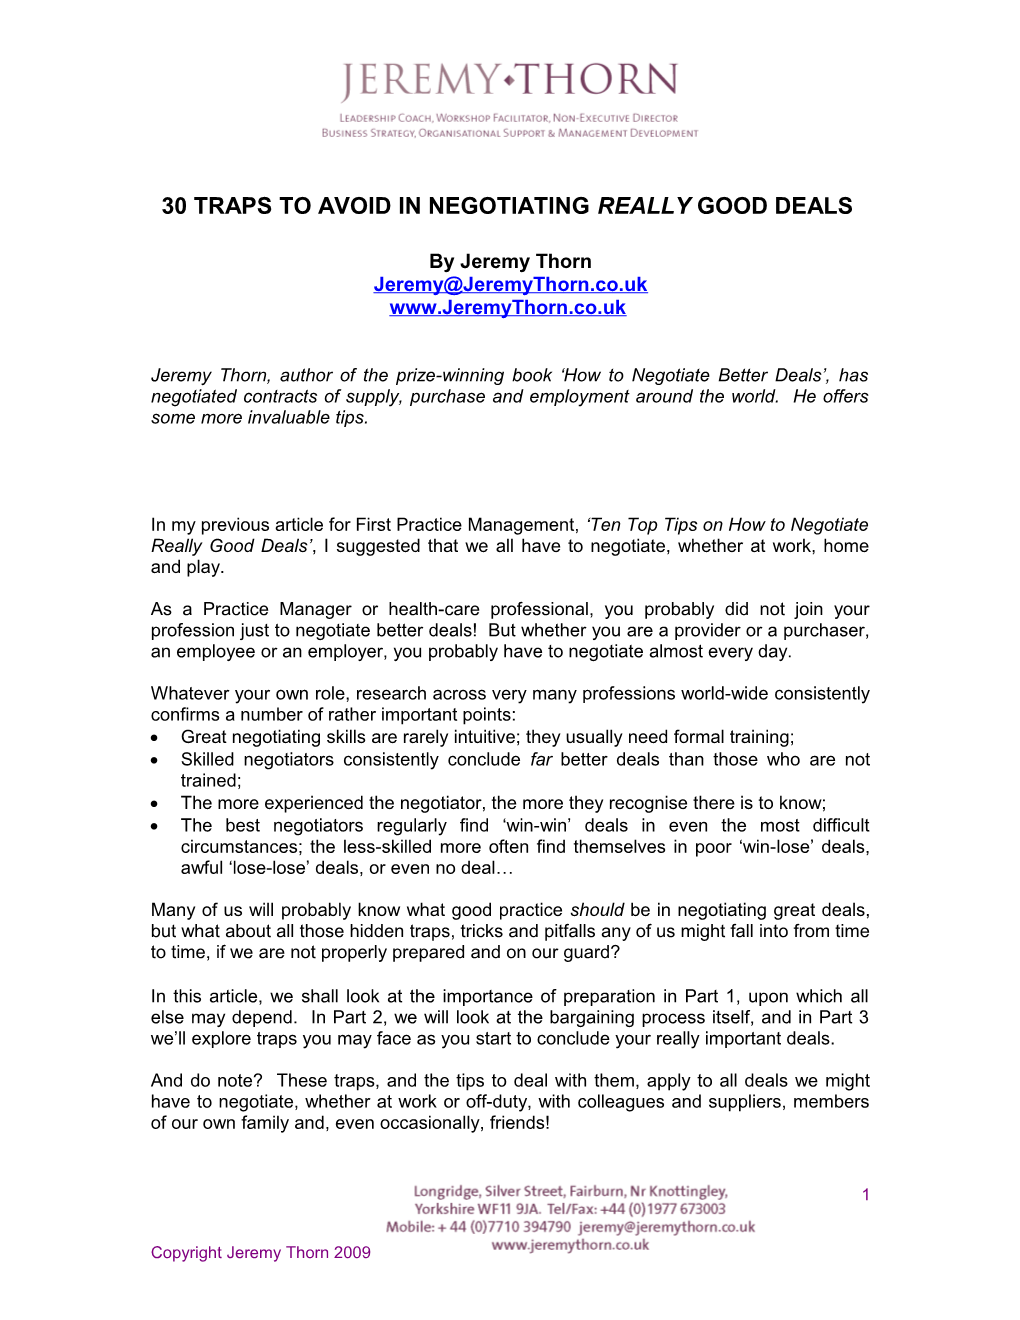 30 Traps to Avoid in Negotiating Really Good Deals